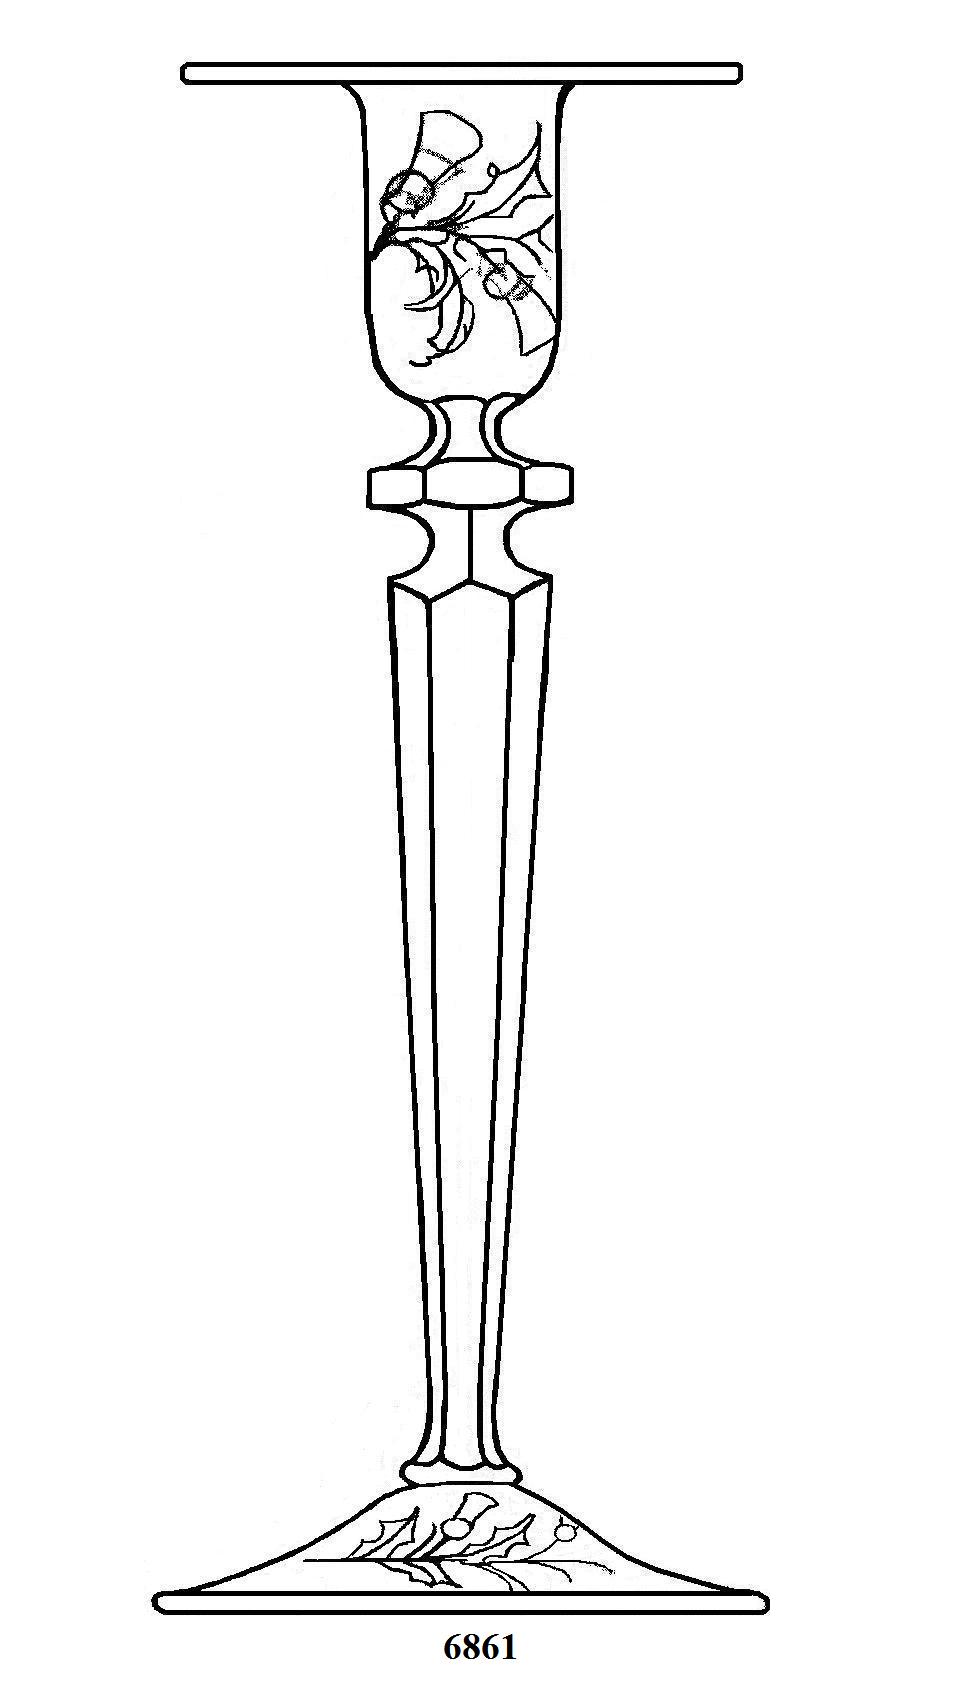 6861 - Engraved Candlestick